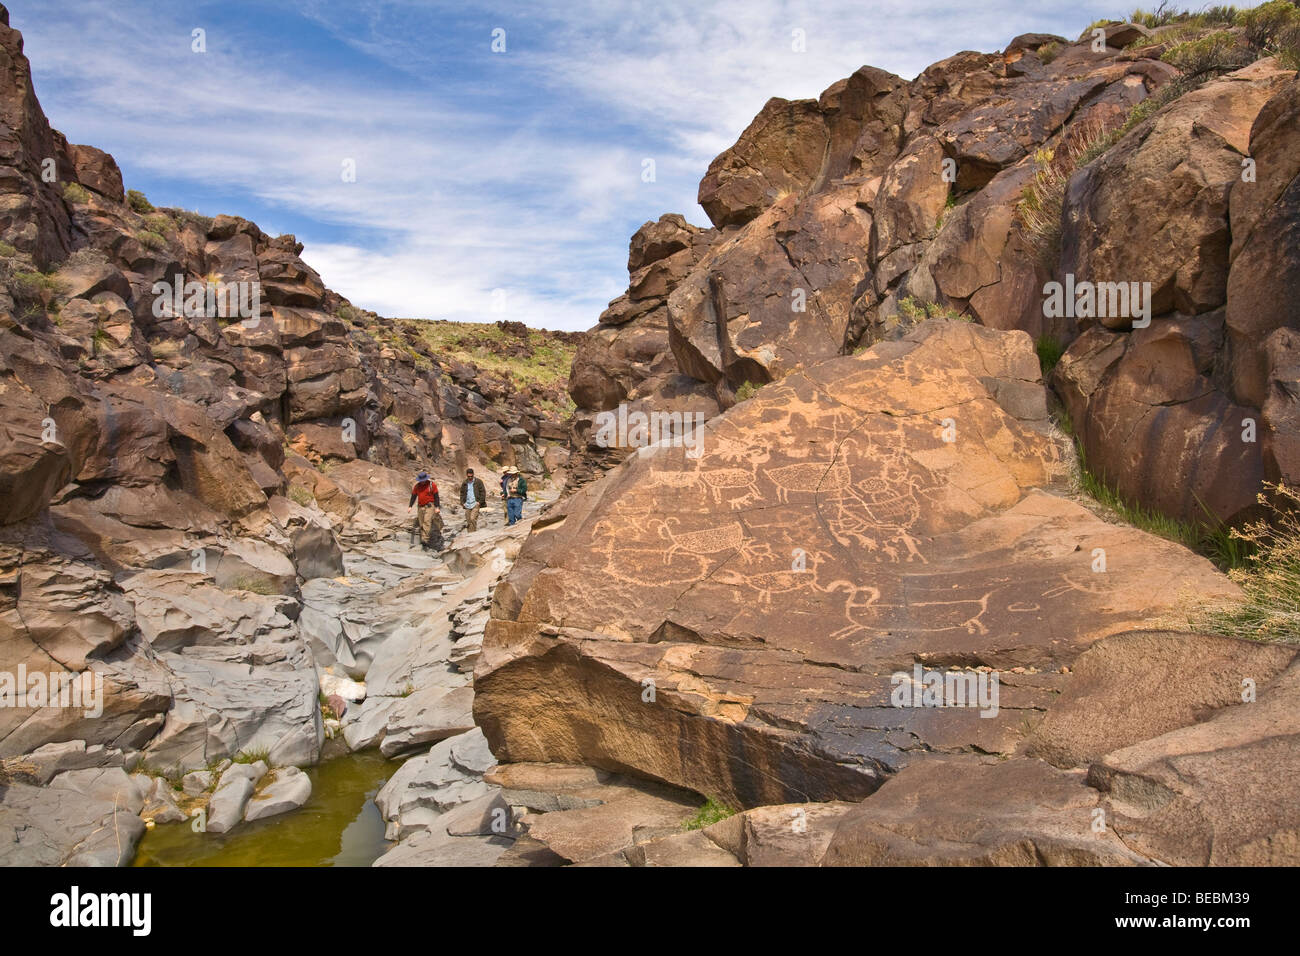 Hikers on tour of Little Petroglyph Canyon, on the China Lake Naval Air Weapons Station, Ridgecrest, California, USA Stock Photo